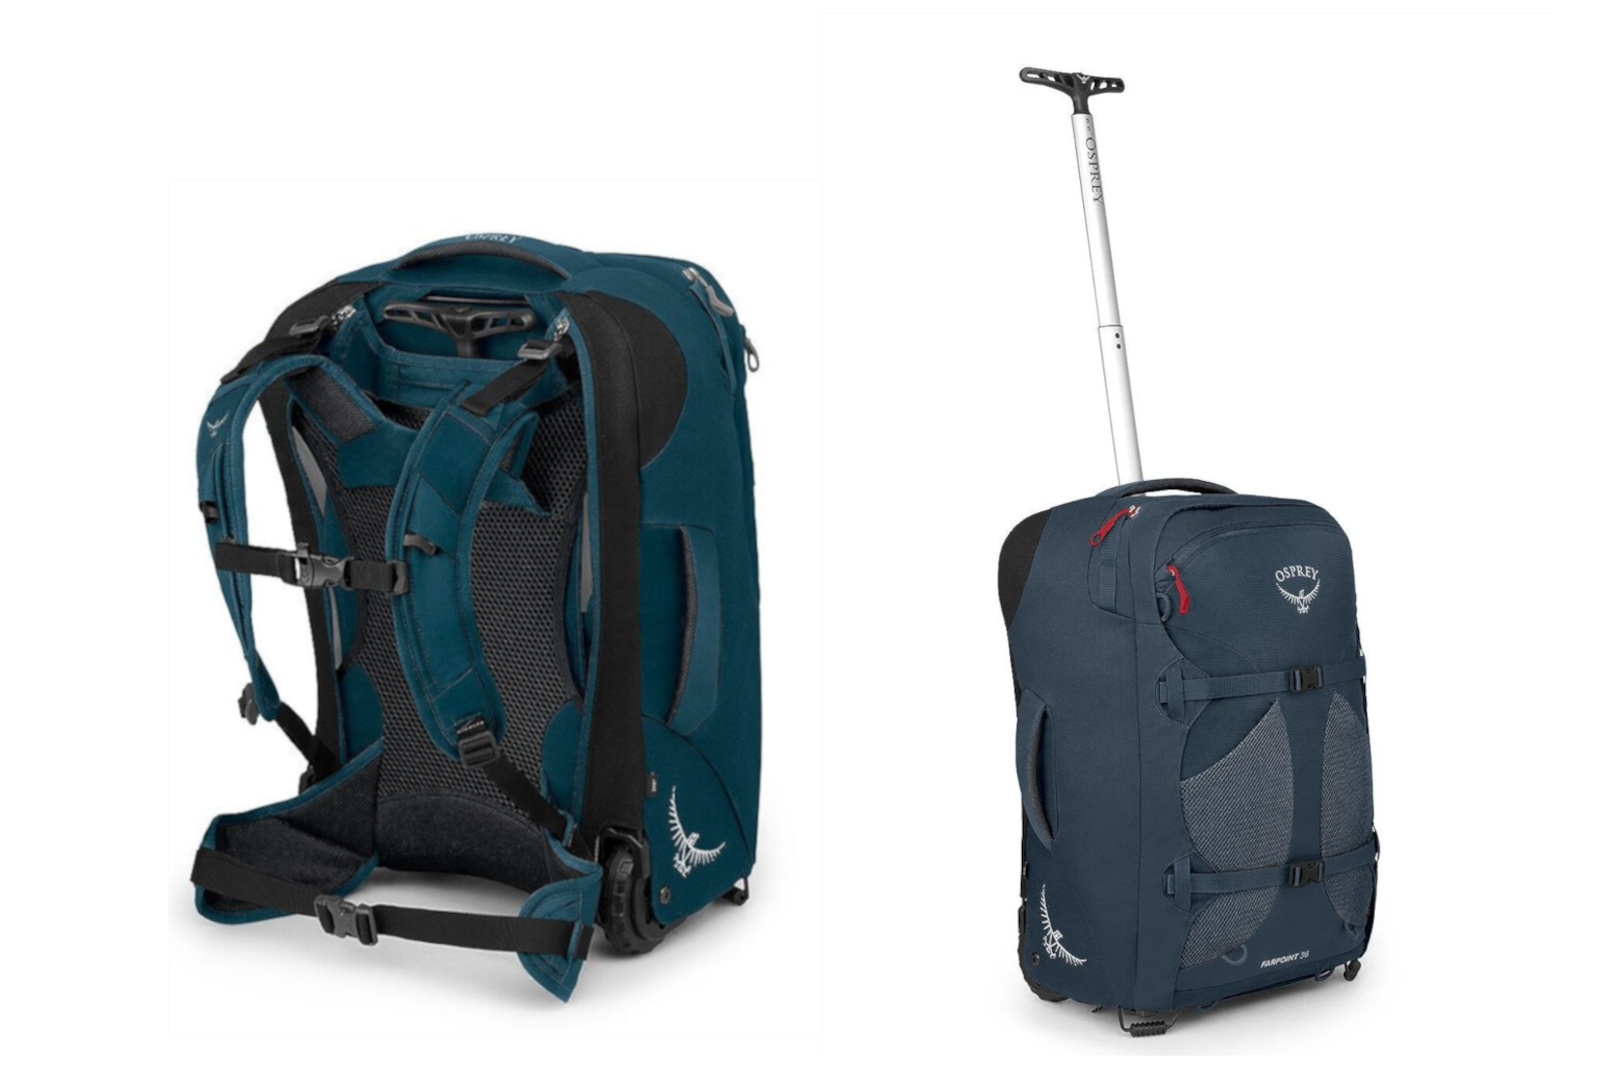 <p>Osprey is also in the travel game, as exemplified by these wheeled luggage packs with supplemental backpack straps.</p> <p>In luggage mode, the Farpoint and Fairview packs have oversized 90mm wheels and a telescoping handle. As a backpack, you’ll appreciate the padded straps and hipbelt as well as the mesh backpanel for overall carrying comfort and convenience.</p> <p>The front panel lets you stash essentials like sandals, sunscreen, or a magazine to keep in reach while on the go. Plus, internal compression straps with fabric wings help keep stored clothes orderly.</p> <a class="buy-now single" href="https://osprey.pxf.io/c/381569/1765694/20745?subId1=gjsposprey4thq224&u=https%3A%2F%2Fwww.osprey.com%2Ffarpoint-wheeled-travel-carry-on-36l-21-5-farpntwh36f22-297%3Fcolor%3DMuted%252520Space%252520Blue">Shop Farpoint </a> <a class="buy-now single" href="https://osprey.pxf.io/c/381569/1765694/20745?subId1=gjsposprey4thq224&u=https%3A%2F%2Fwww.osprey.com%2Ffairview-wheeled-travel-pack-carry-on-36l-21-5-fairvwwh36f22-273%3Fcolor%3DNight%252520Jungle%252520Blue">Shop Fairview 36L</a>